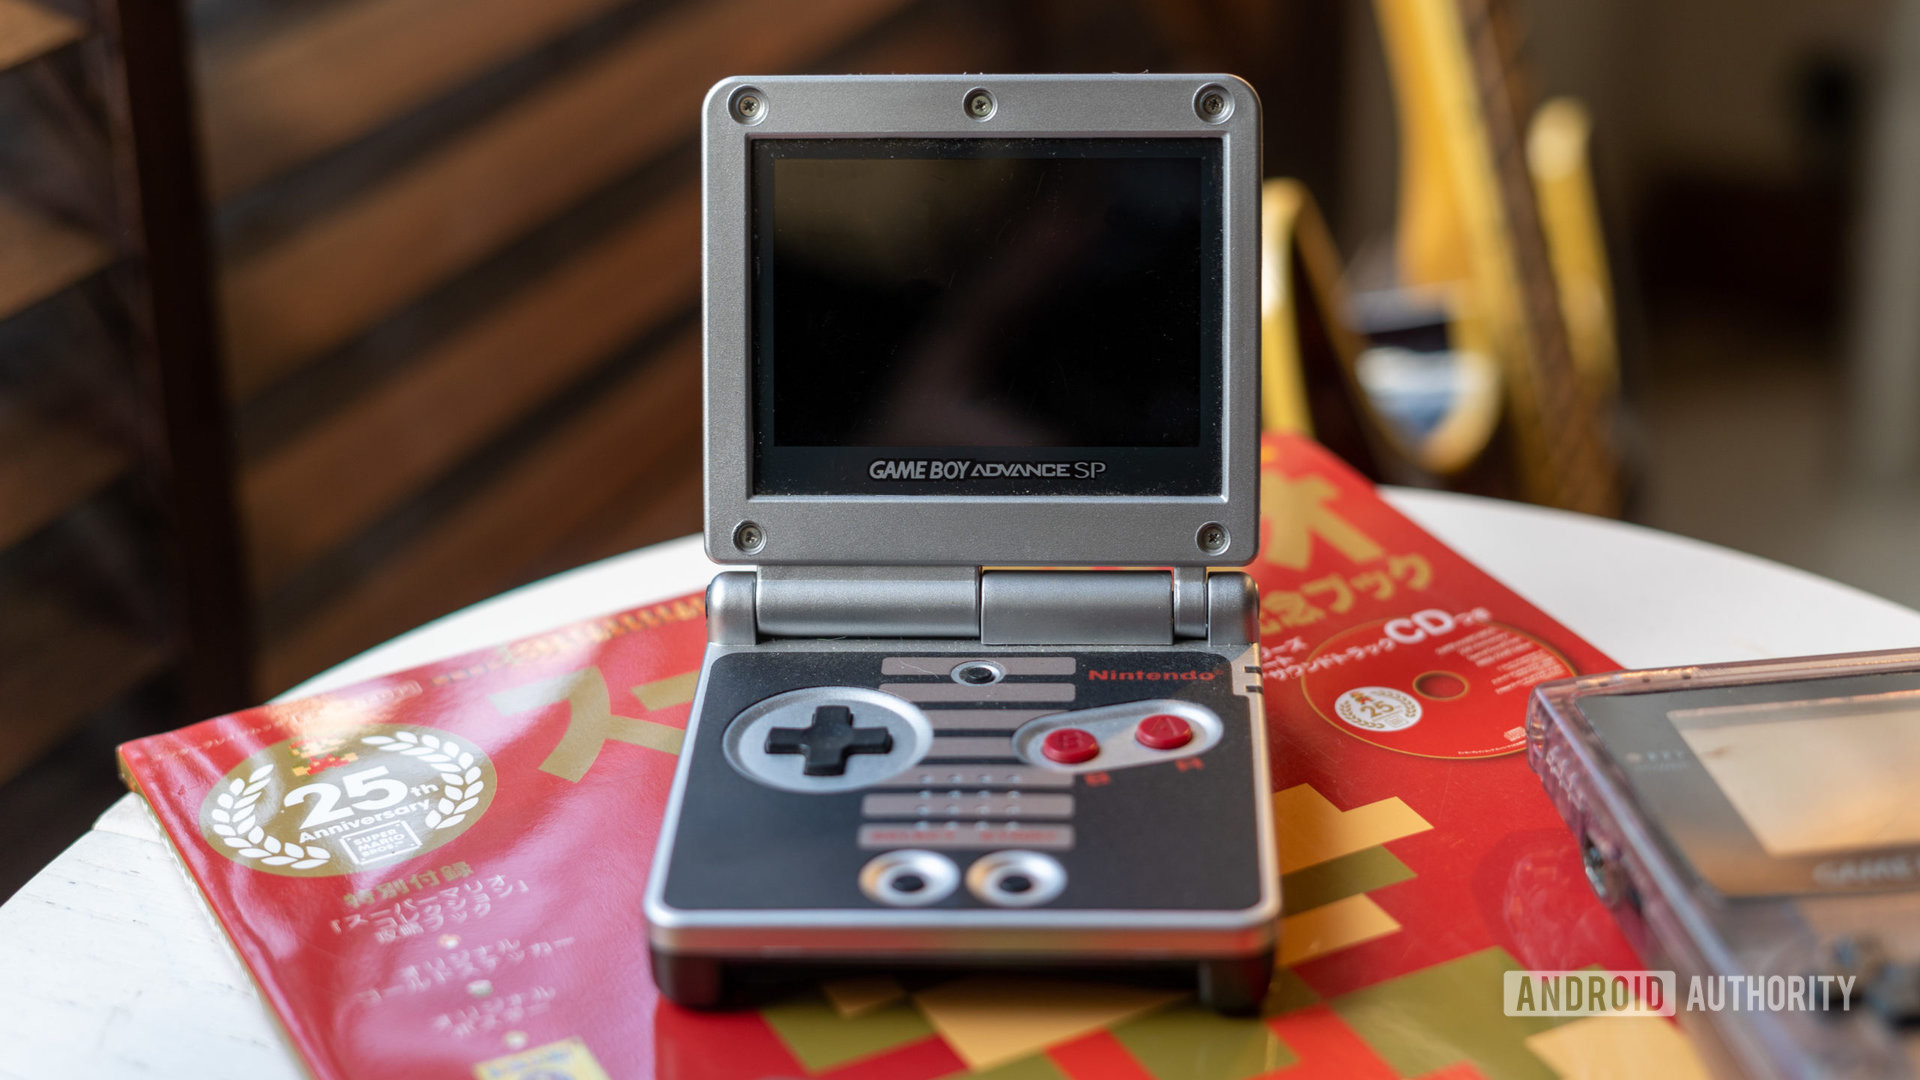 GameBoy Advance SP placed on a magazine